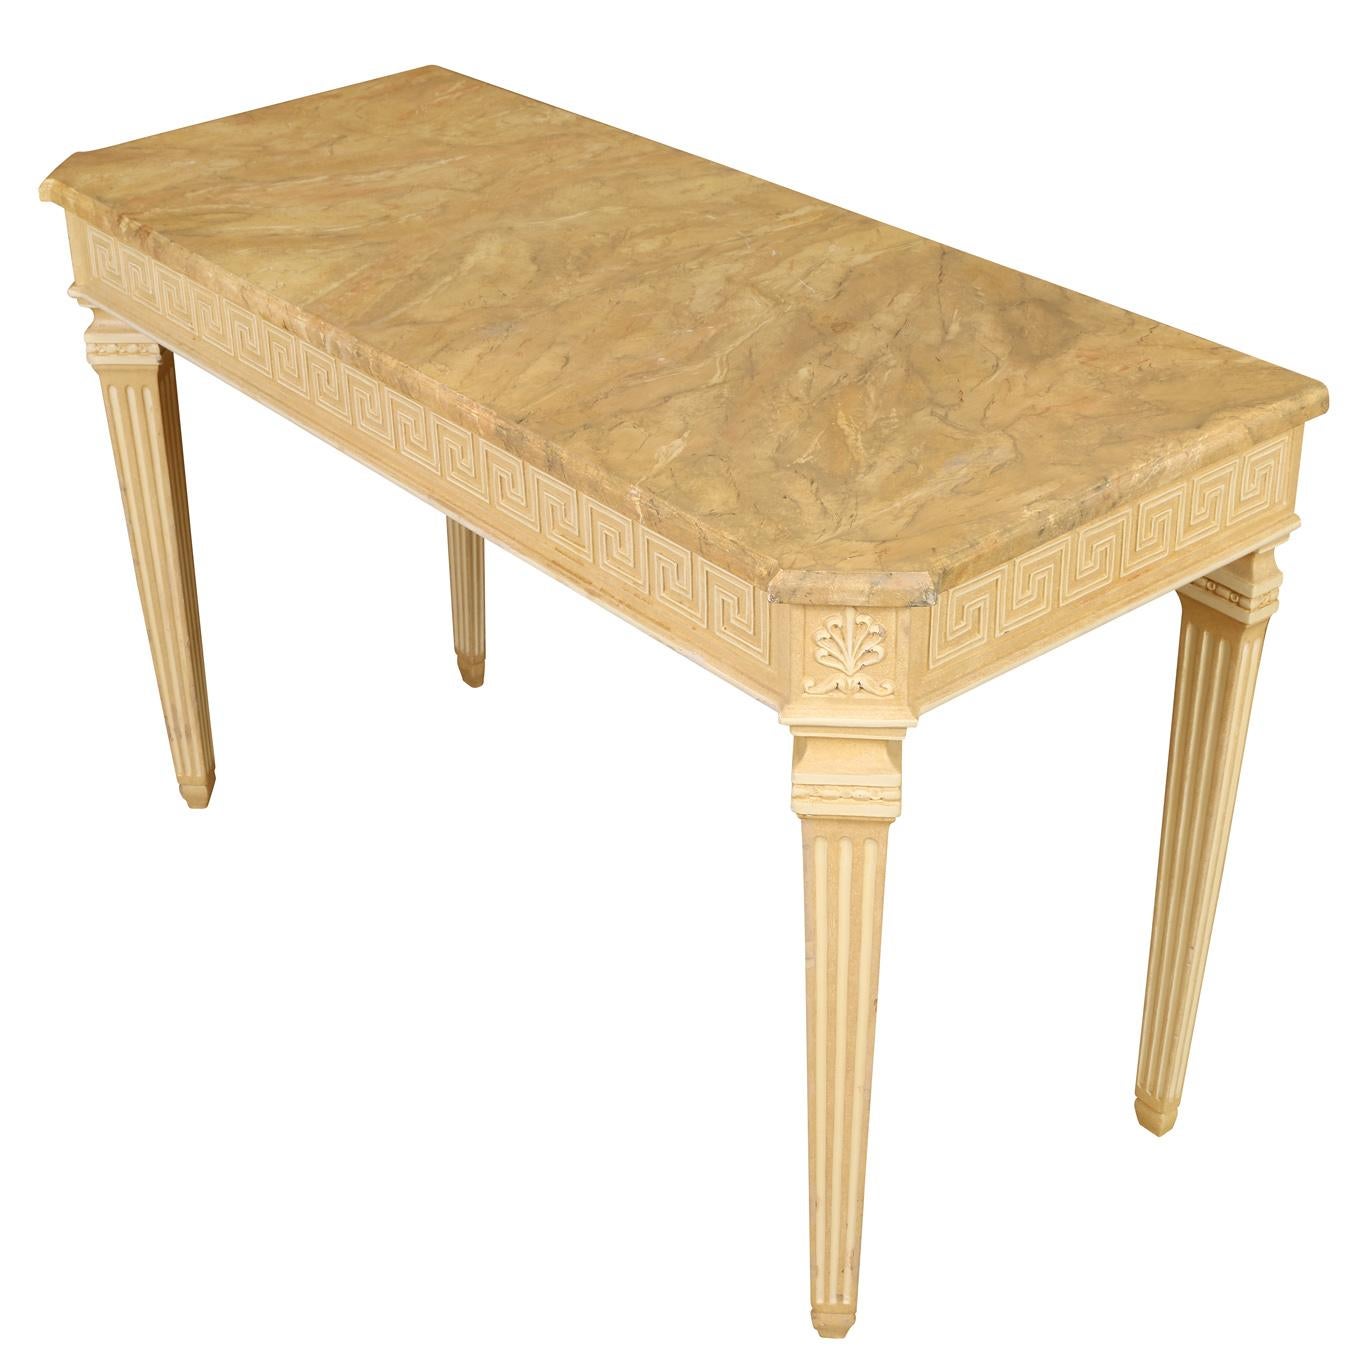 A Louis XVI style faux marble top painted console table with cream legs and base, and earth tones painted in cream, browns and taupe to the top. Greek key design carved to apron and legs are reeded with floral motif at top. Table and front legs are